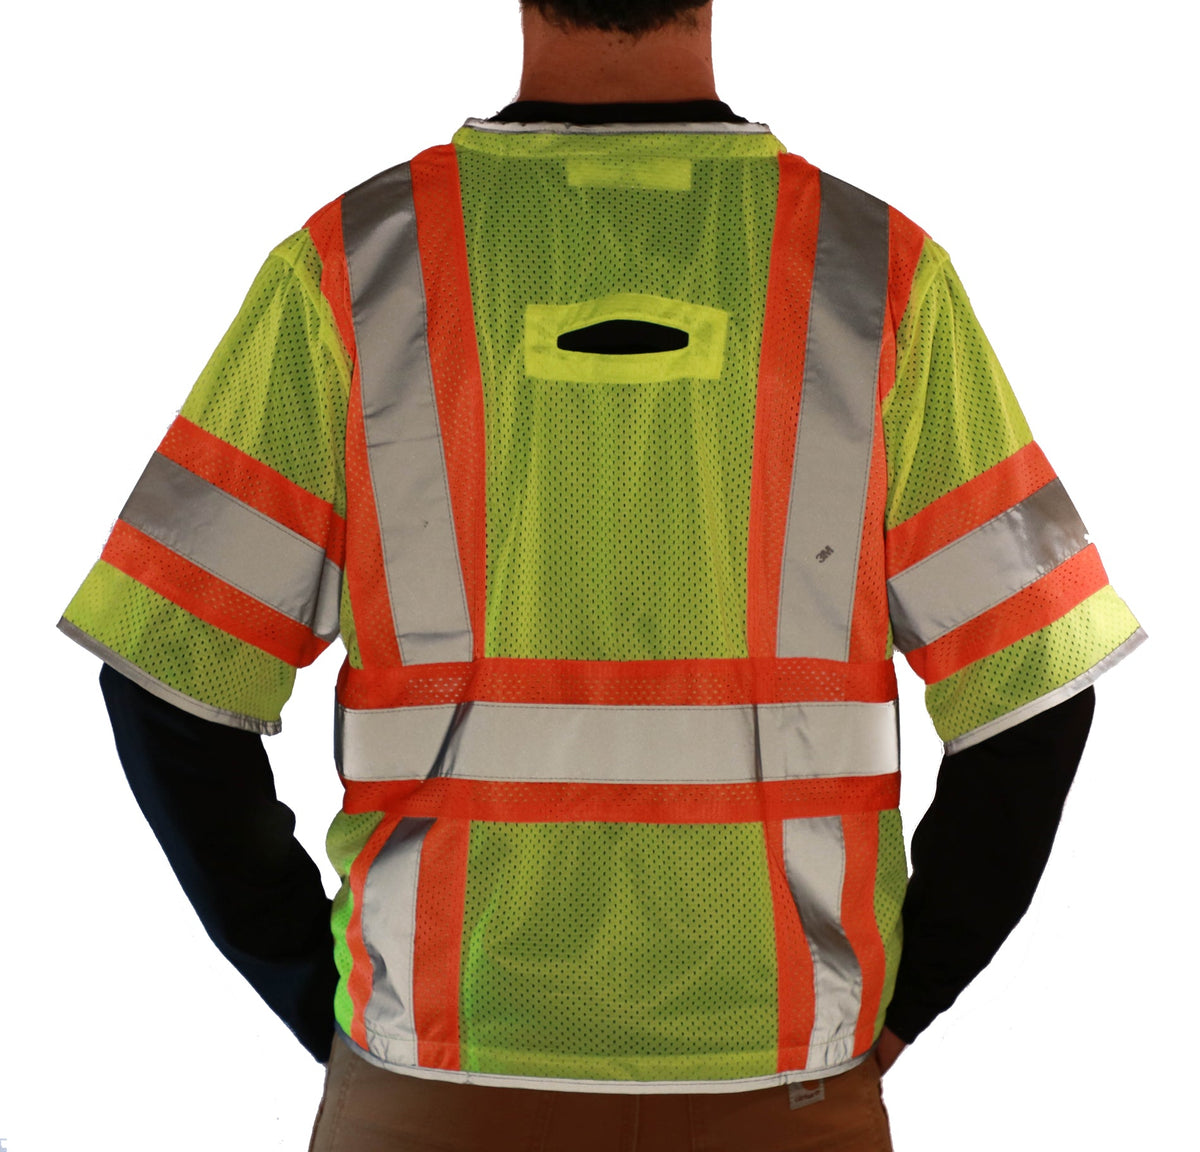 Majestic Class 3 Two Tone Vest - Work World - Workwear, Work Boots, Safety Gear